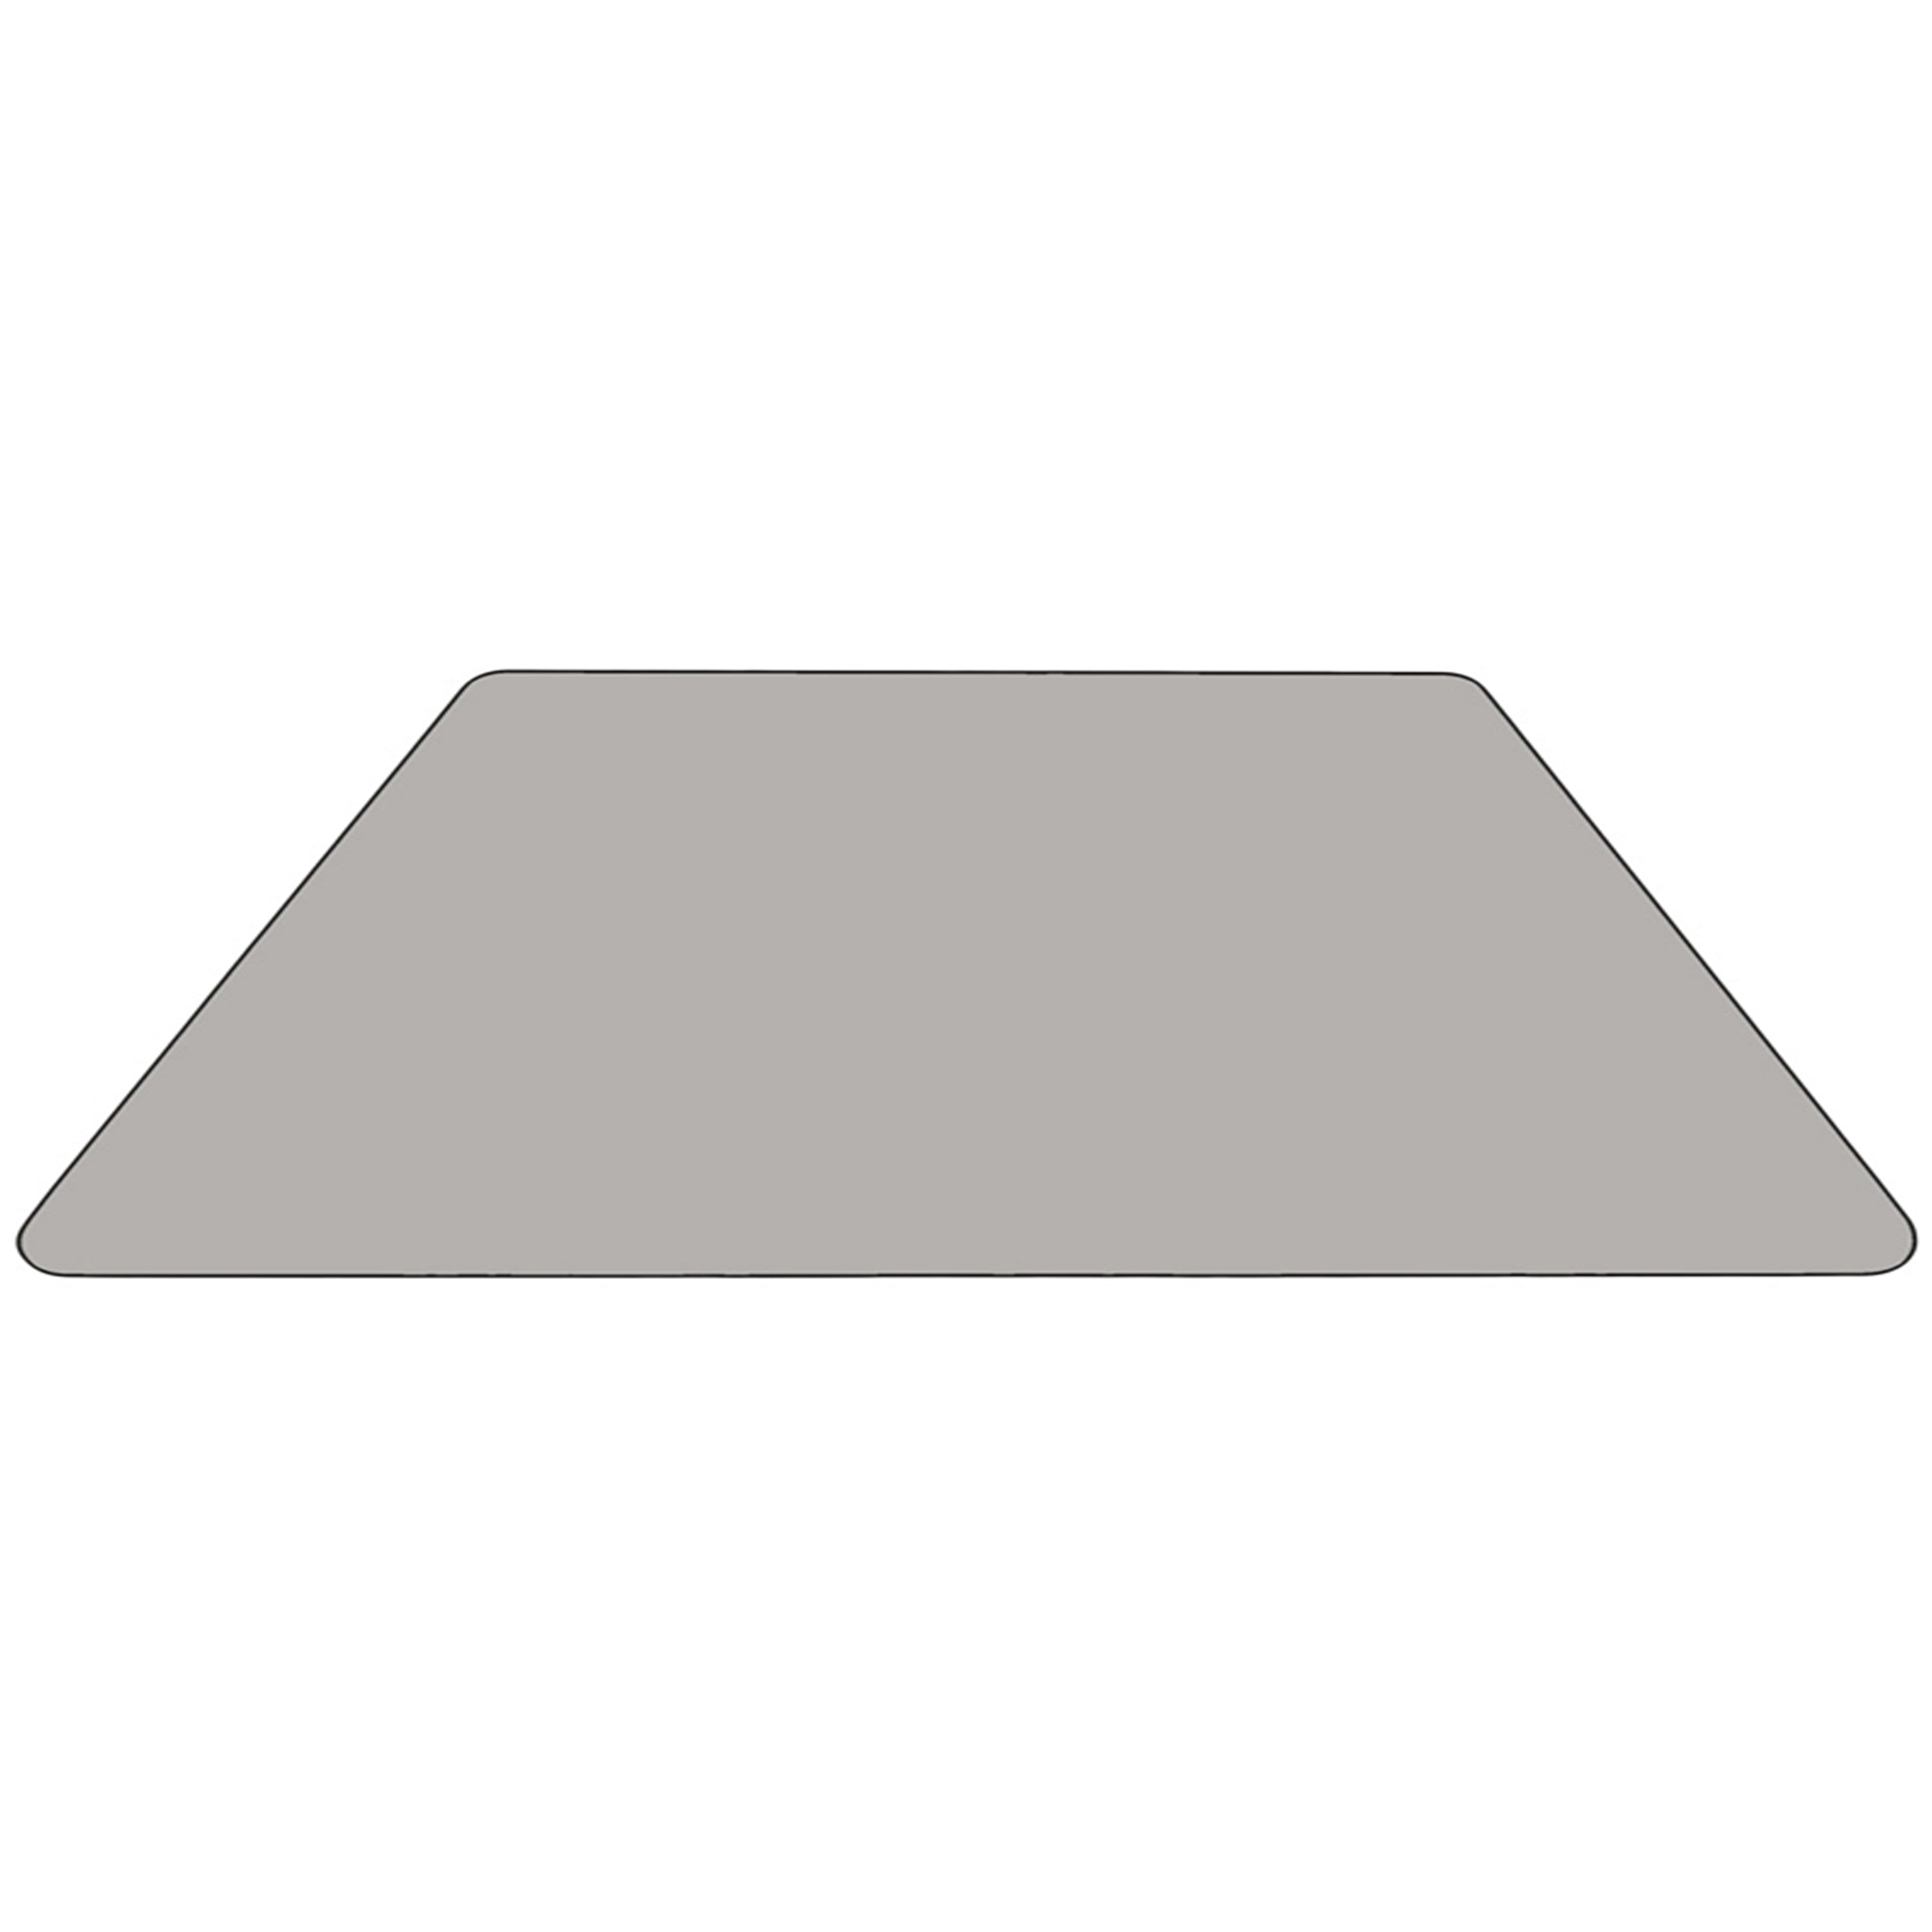 F&F Furniture Group 57.25 Trapezoid Gray HP Laminate Activity Table with Height Adjustable Short Legs 